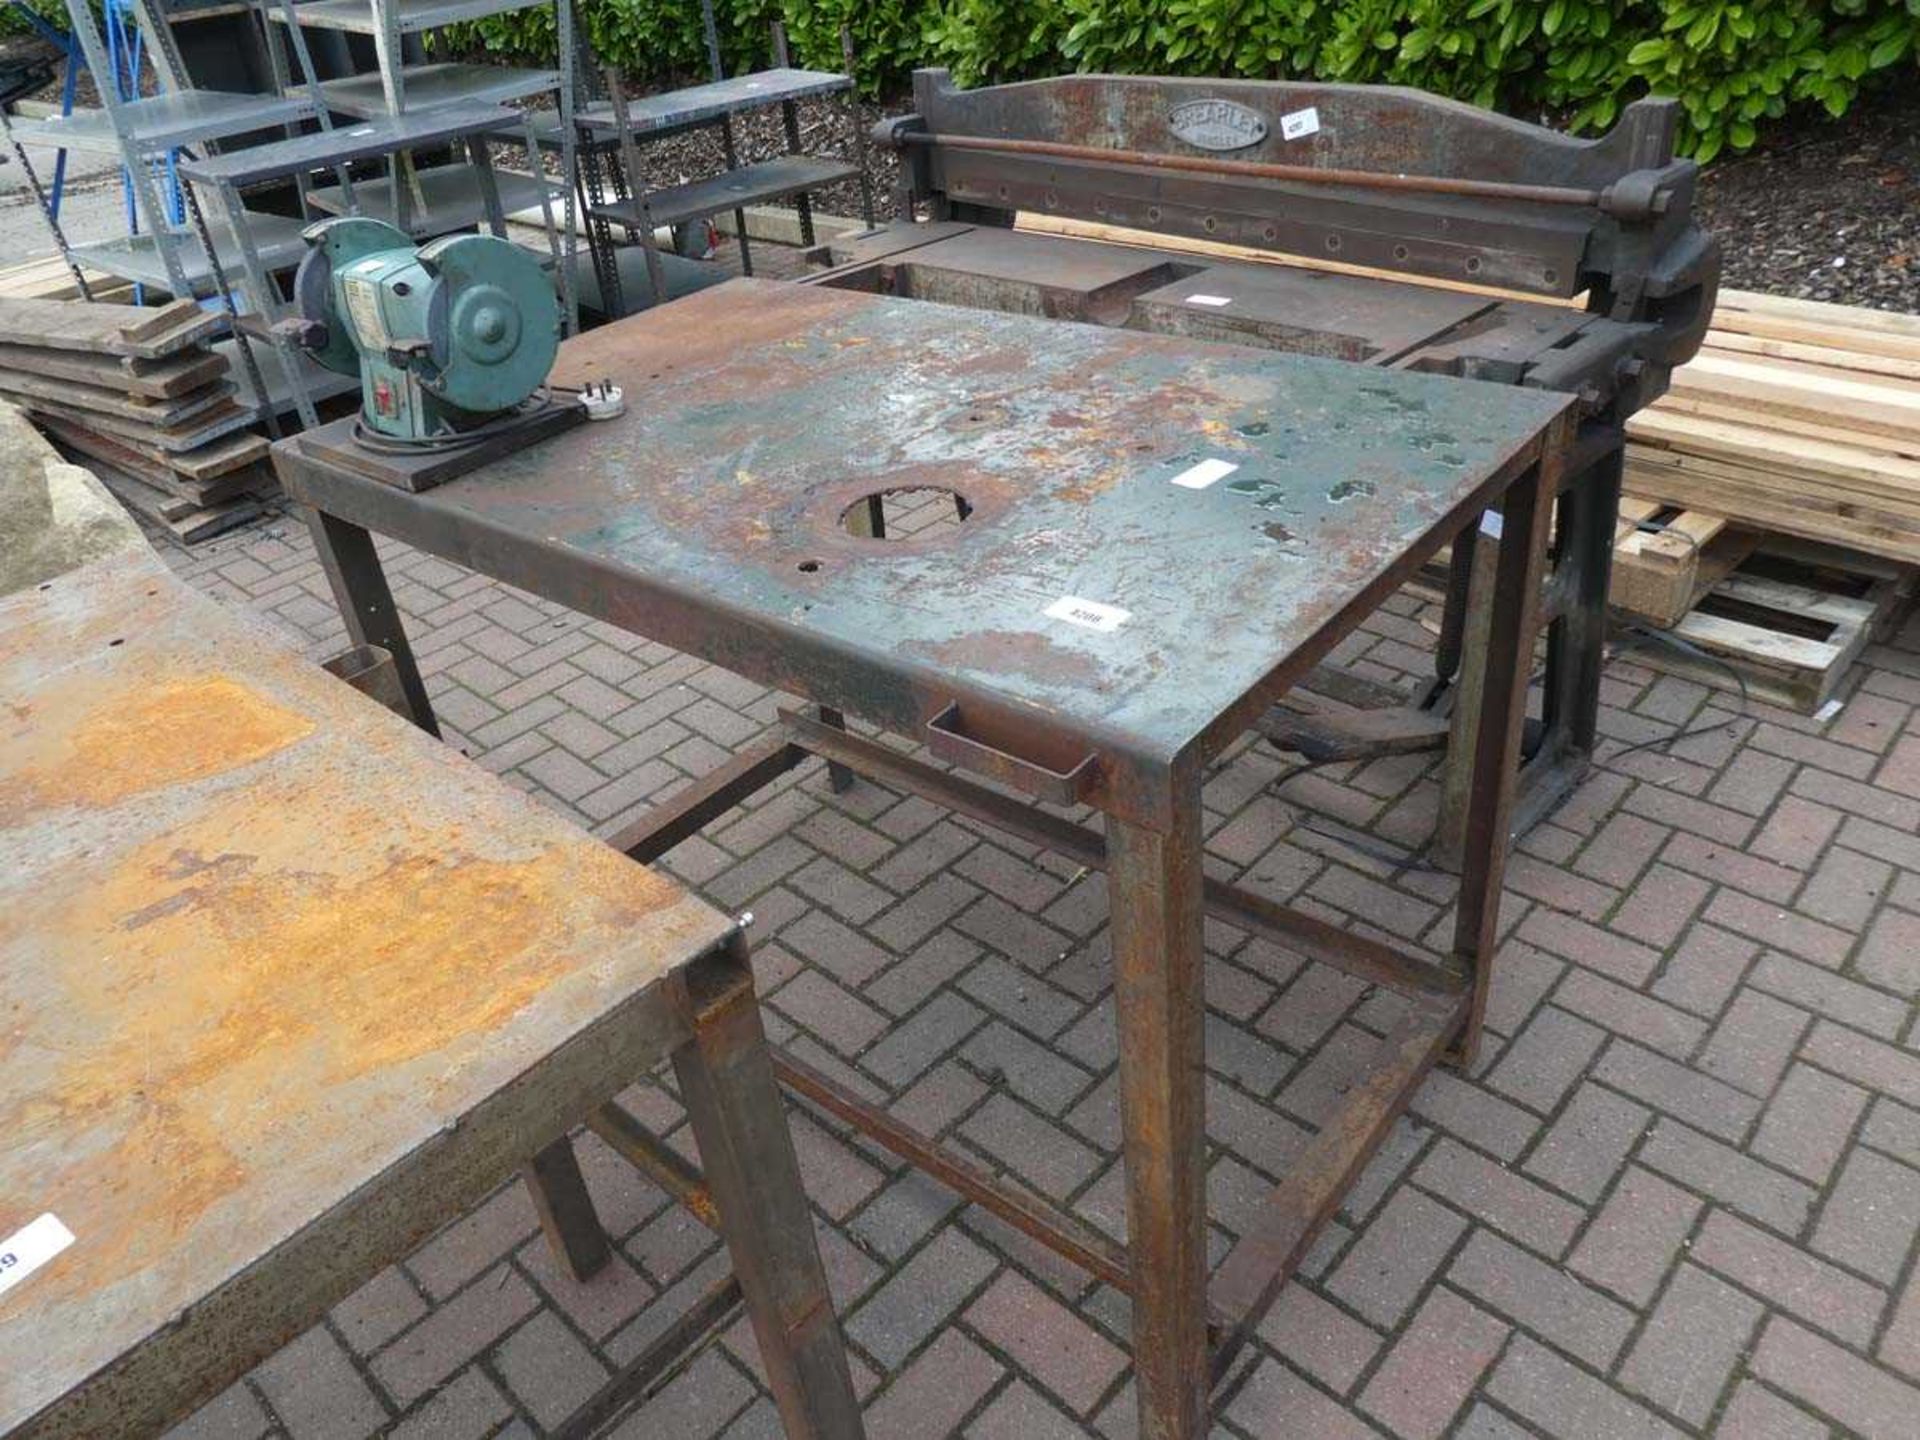 +VAT Metal working bench with double ended bench grinder